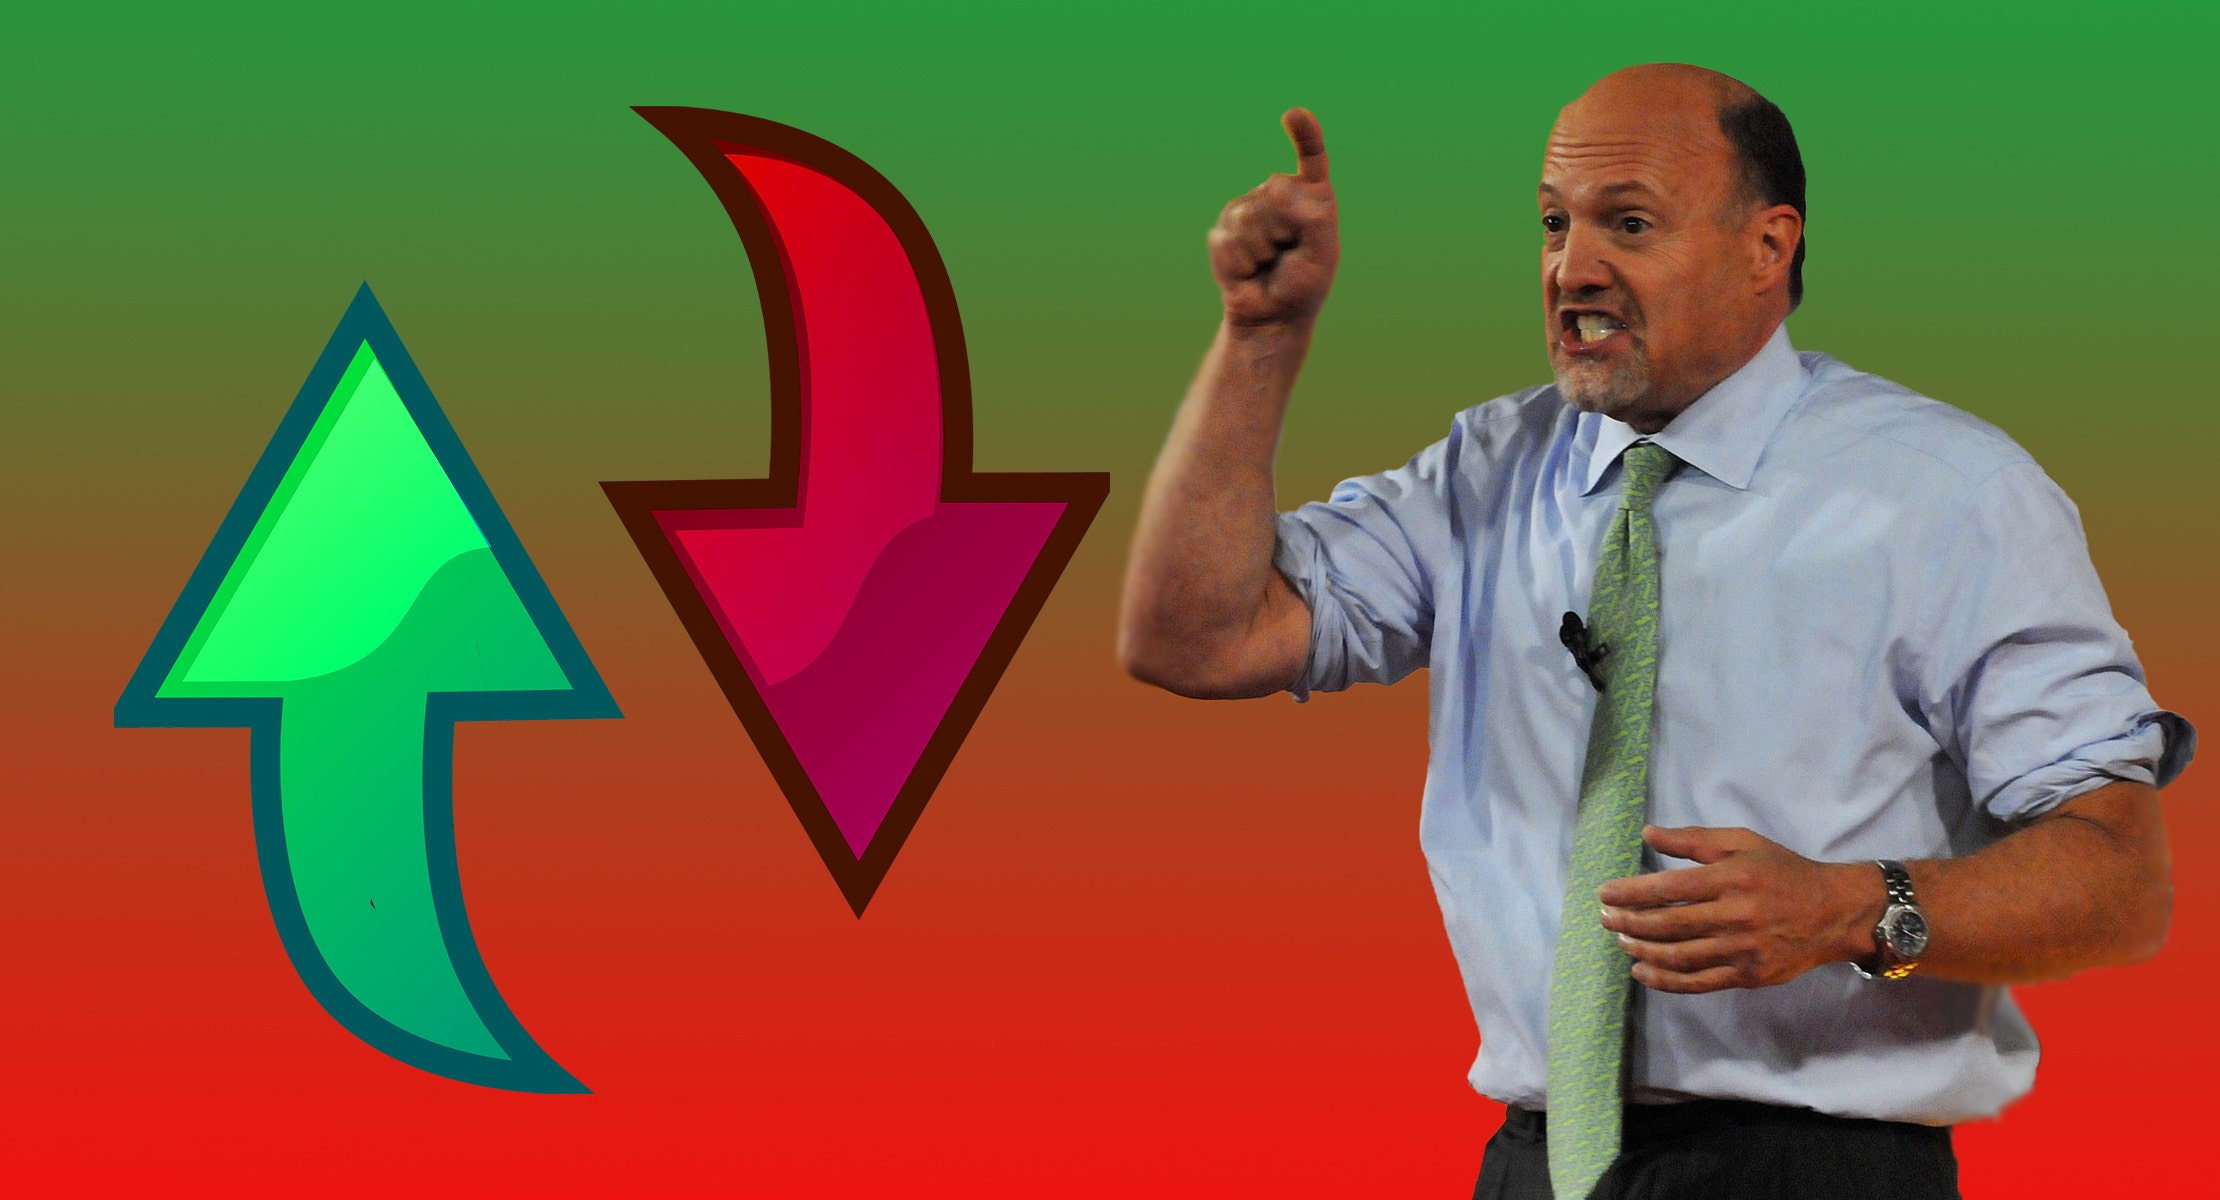 'I Want You To Bet Against Me': Jim Cramer Calls Out New Inverse ETF With His 42 Years Of Success